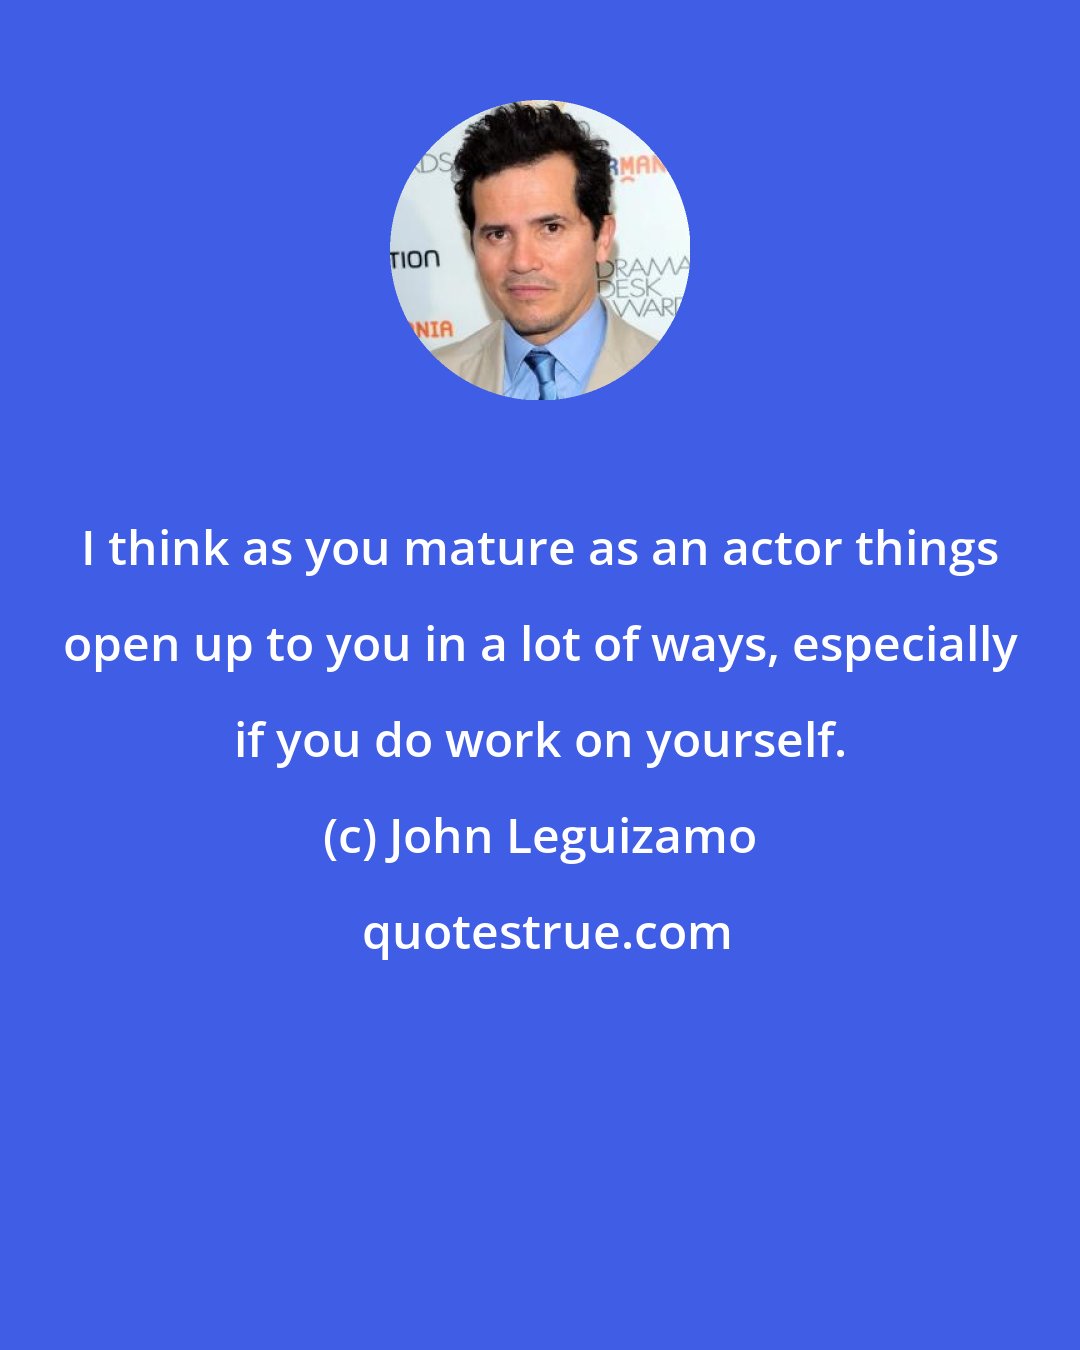 John Leguizamo: I think as you mature as an actor things open up to you in a lot of ways, especially if you do work on yourself.